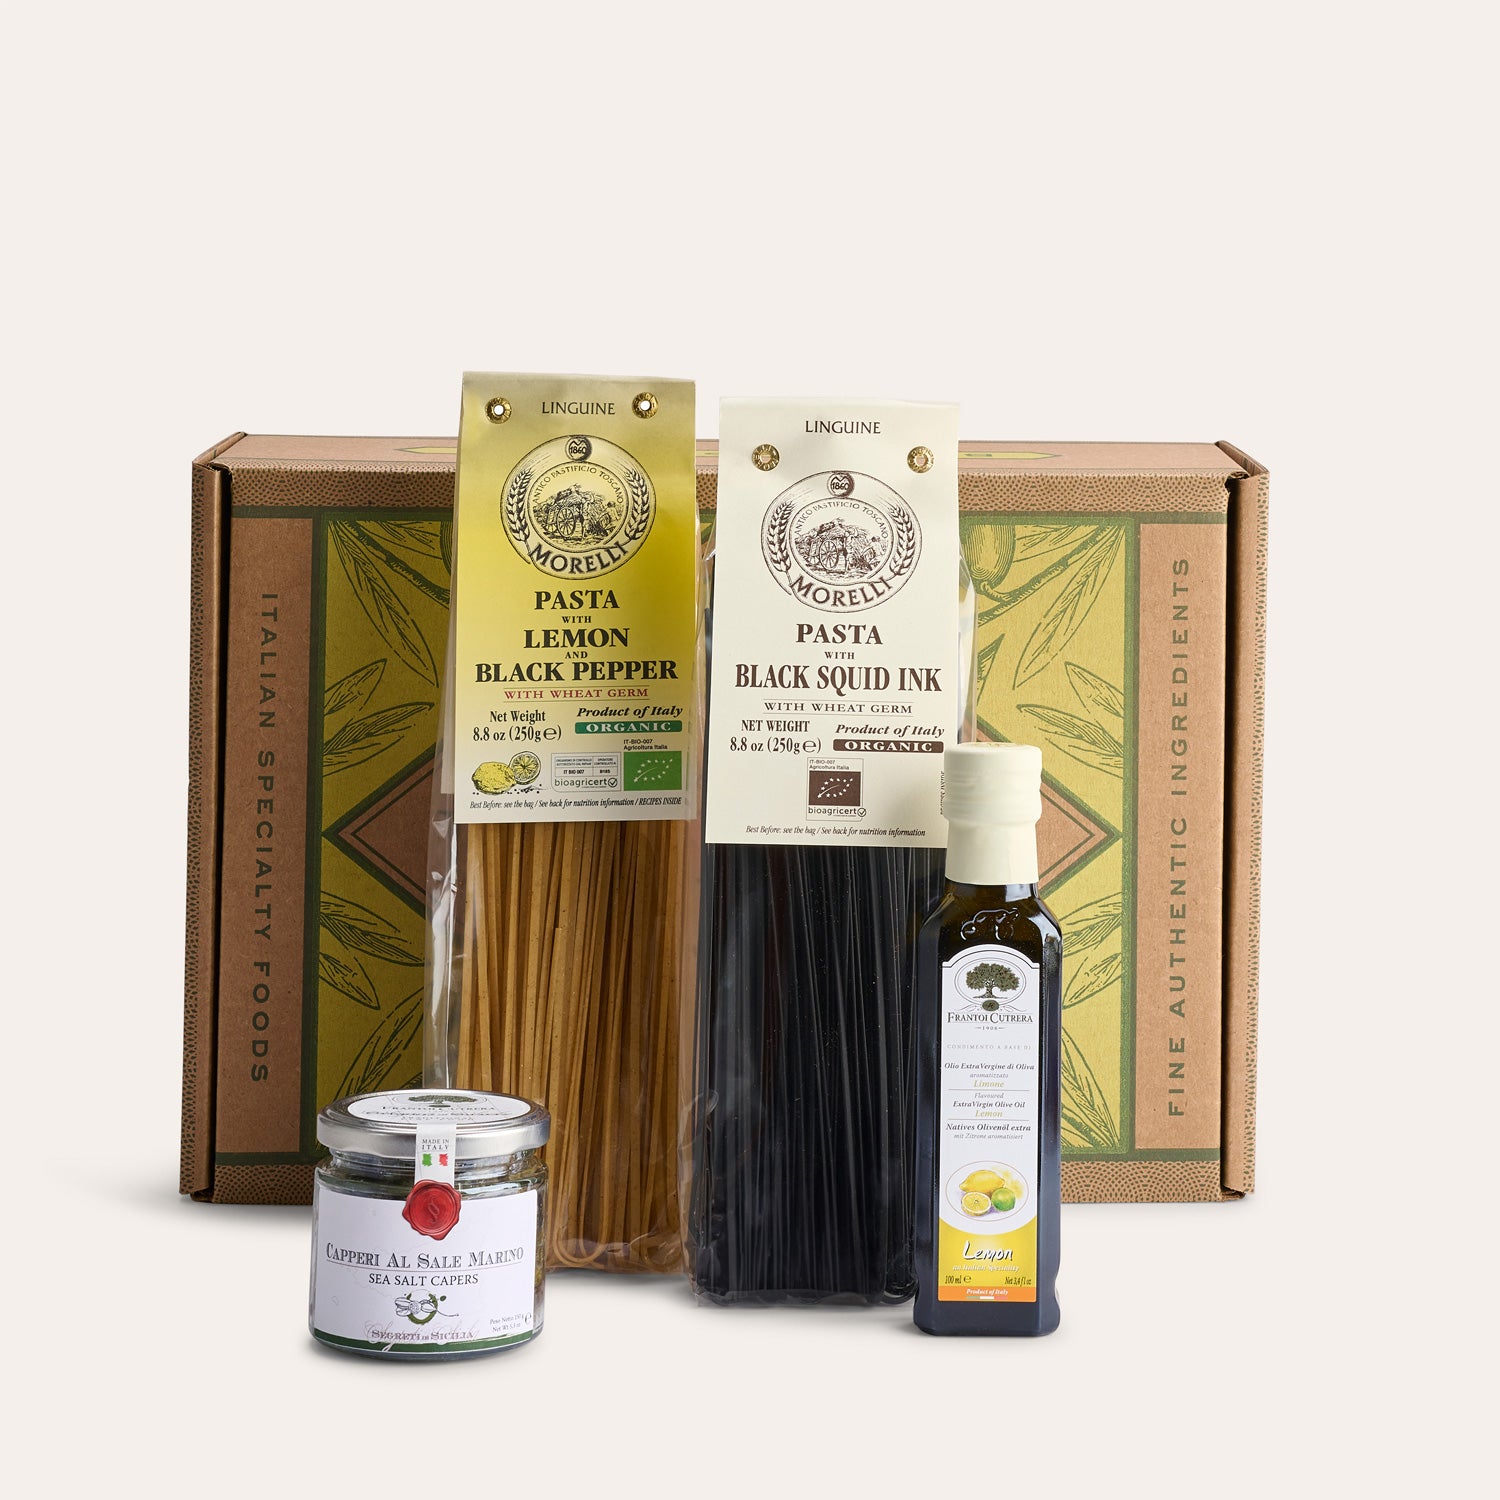 Il Toscano Gift Basket  Carfagna's Online Store